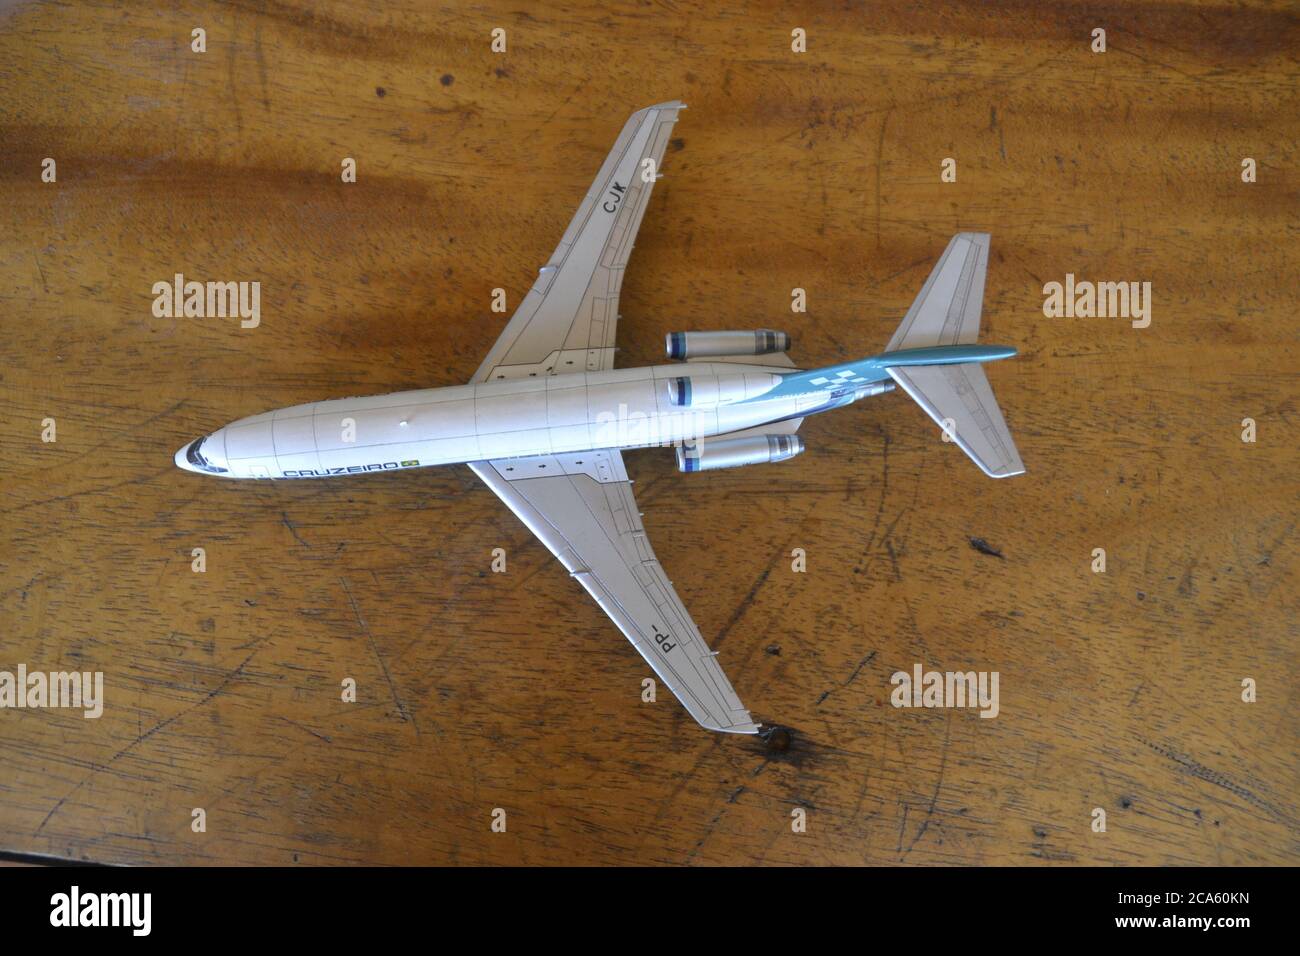 Commercial aircraft. Scale plastic model of commercial aircraft used in Brazil, top view, with wooden bottom, Brazil, South America Stock Photo